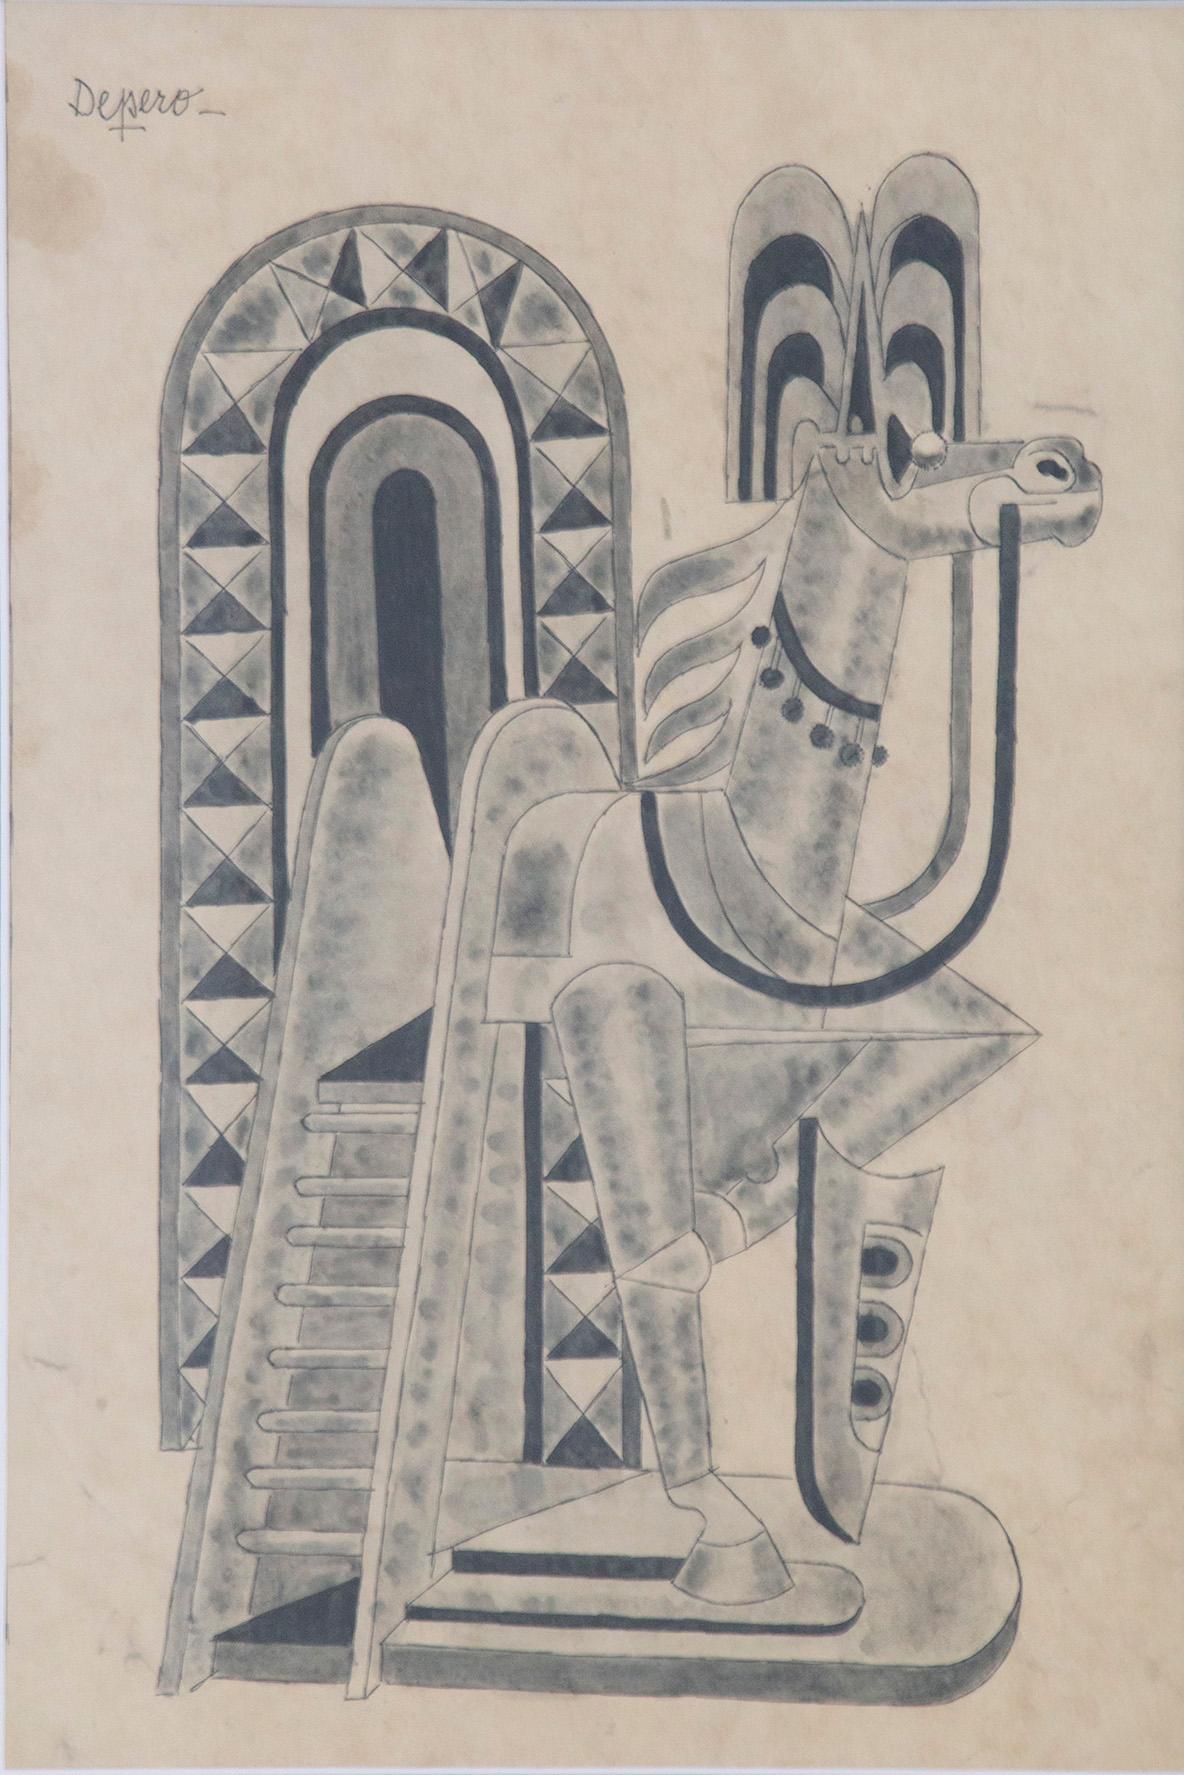 Rare and beautiful painted work by Fortunato Depero from 1948, Title: Horse and Stained Glass Window. Technique: Indian ink and diluted Indian ink on paper. Details: Signature top left. Work archived at the Archivio Unico for the catalogue of the